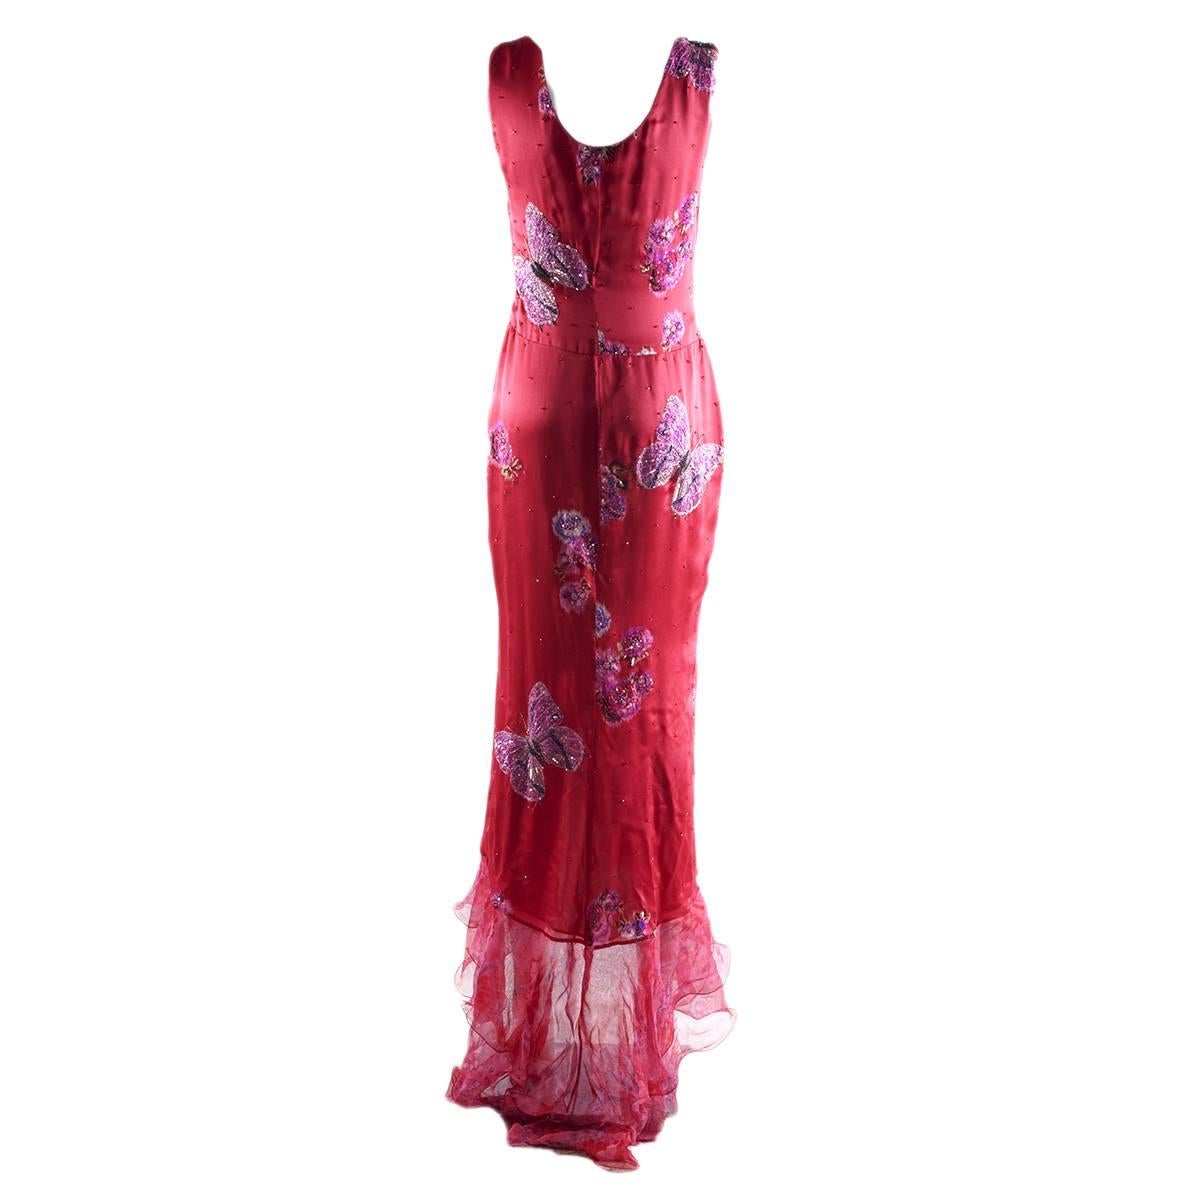 Amazing cocktail dress by Emanuel Ungaro Paris
100% Silk
Silk lining
Fuchsia color
Superb embroidery with sequins
Butterflies and flowers pattern
Shades of silk voile at the bottom
Size french 38 (Italian 42 - Us 8)
Worldwide express